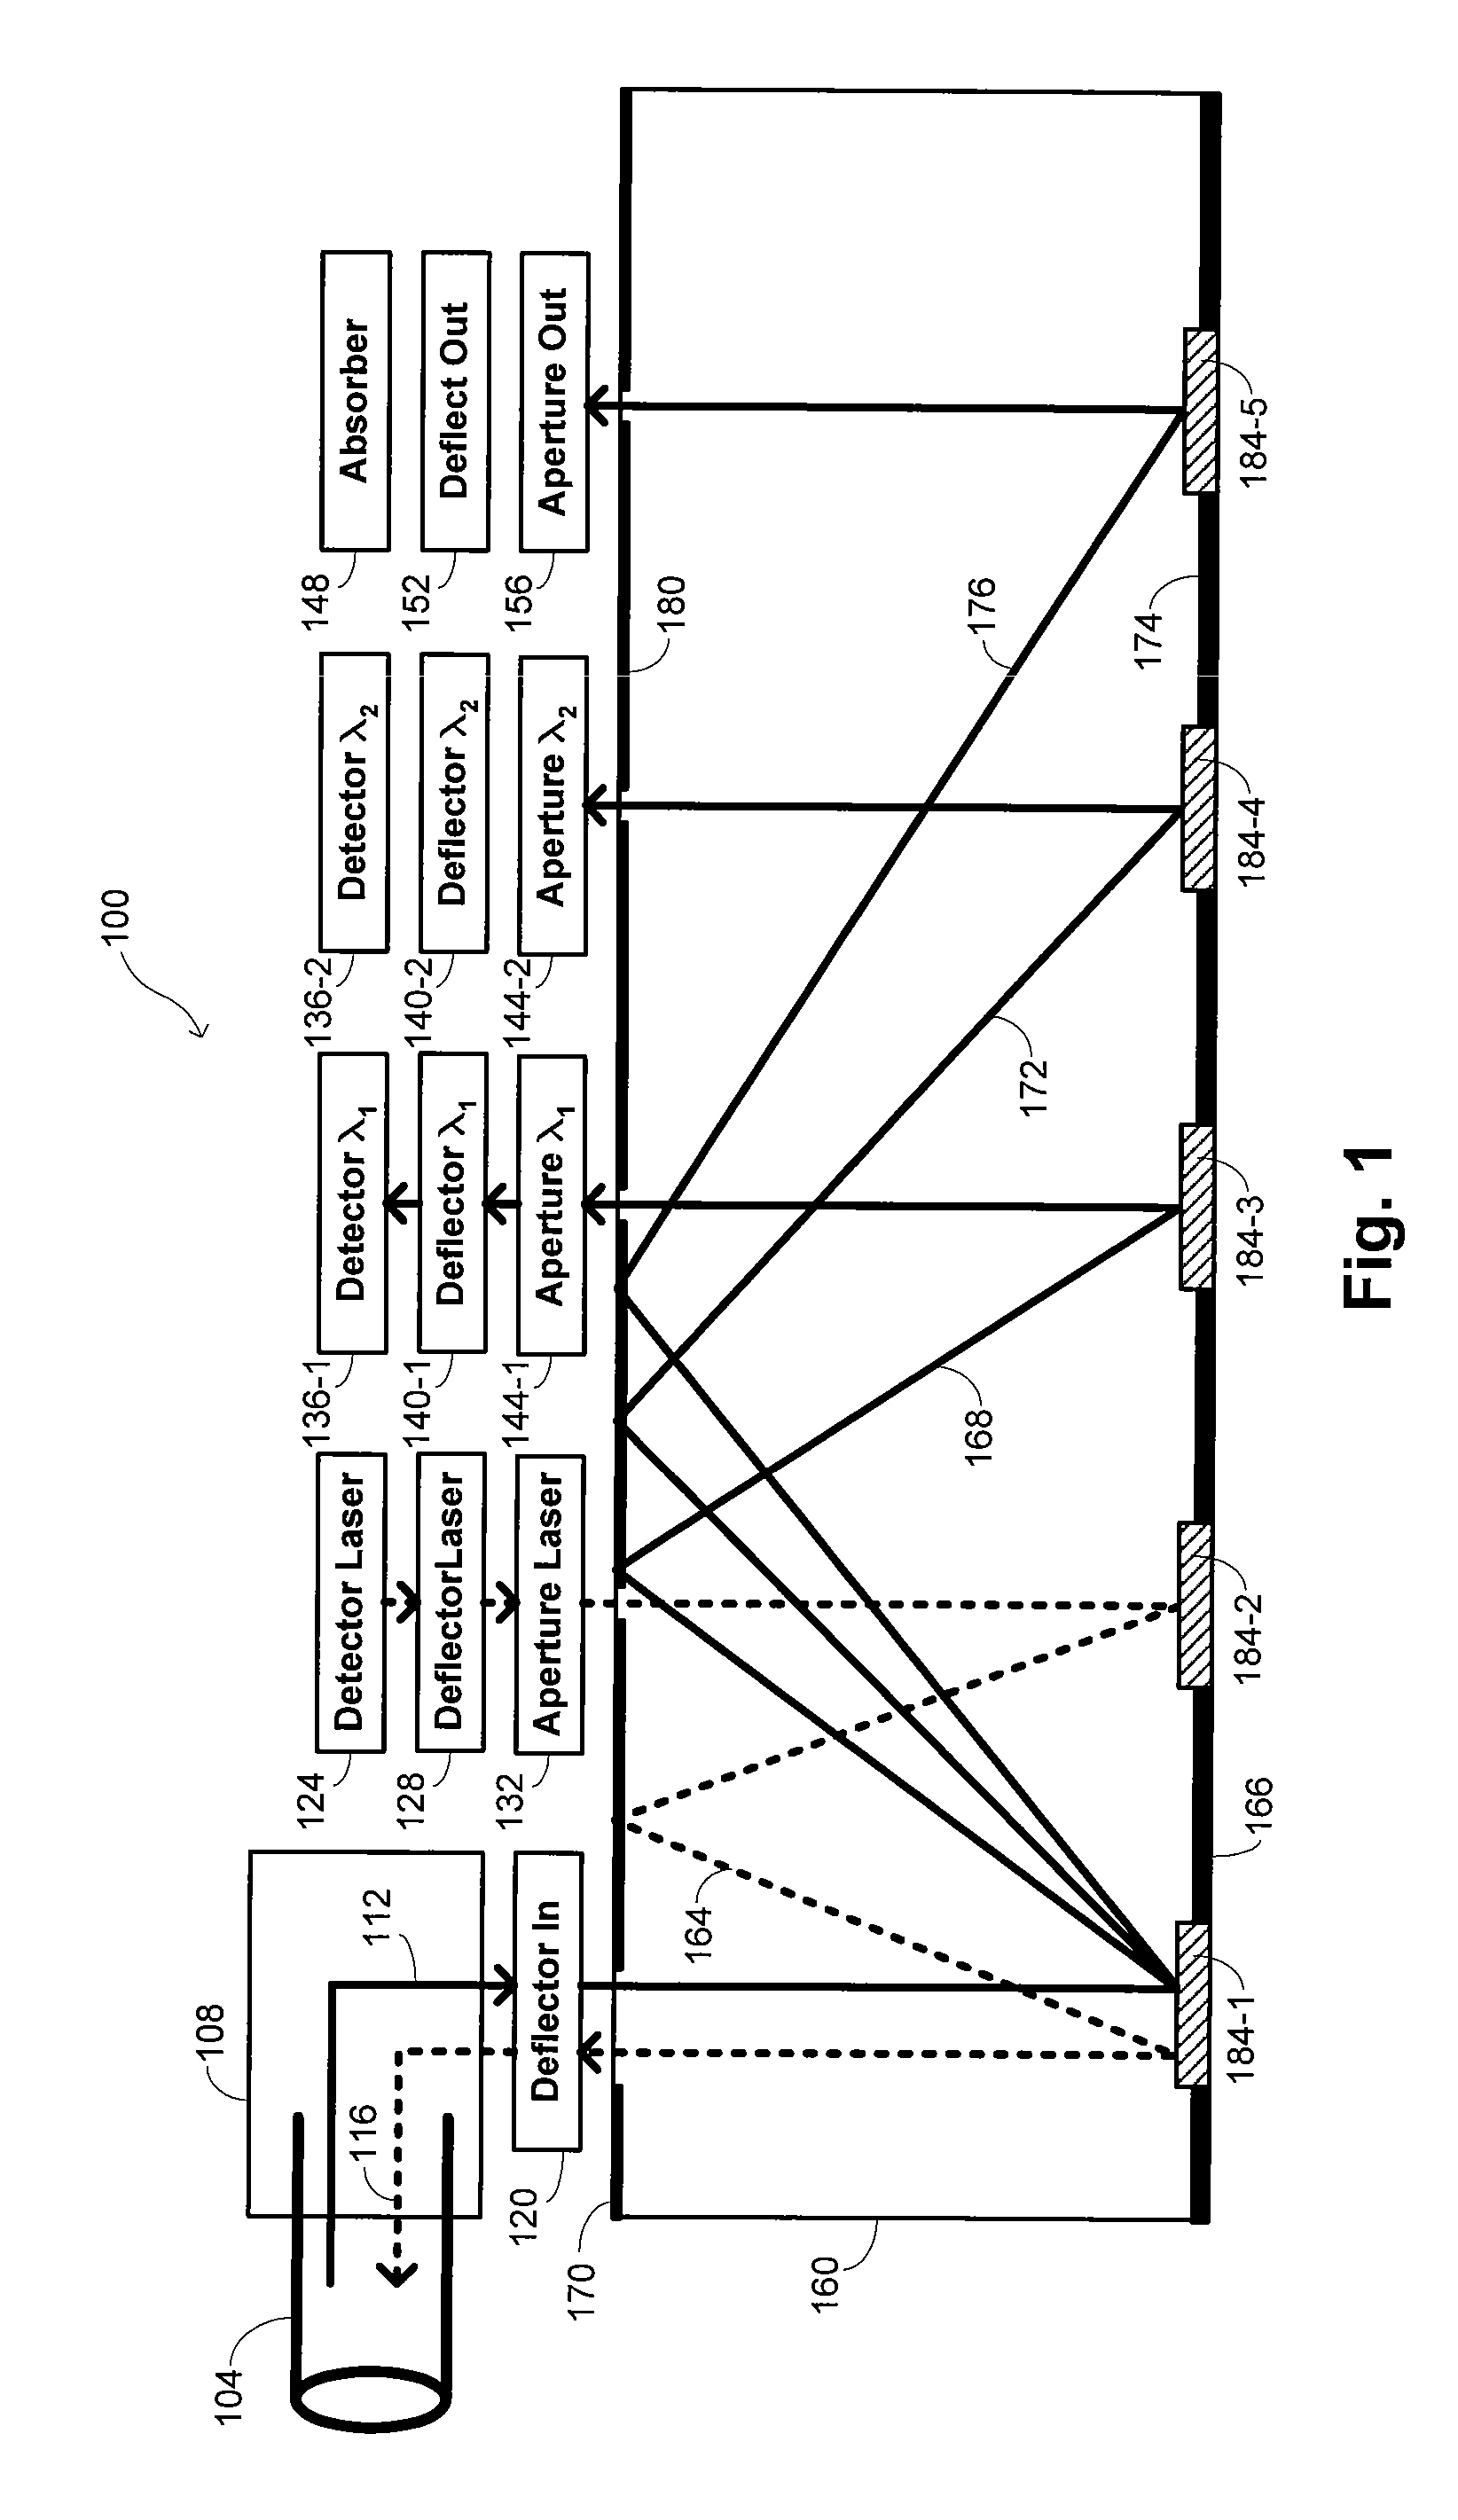 Method and apparatus for demultiplexing optical signals in a passive optical network